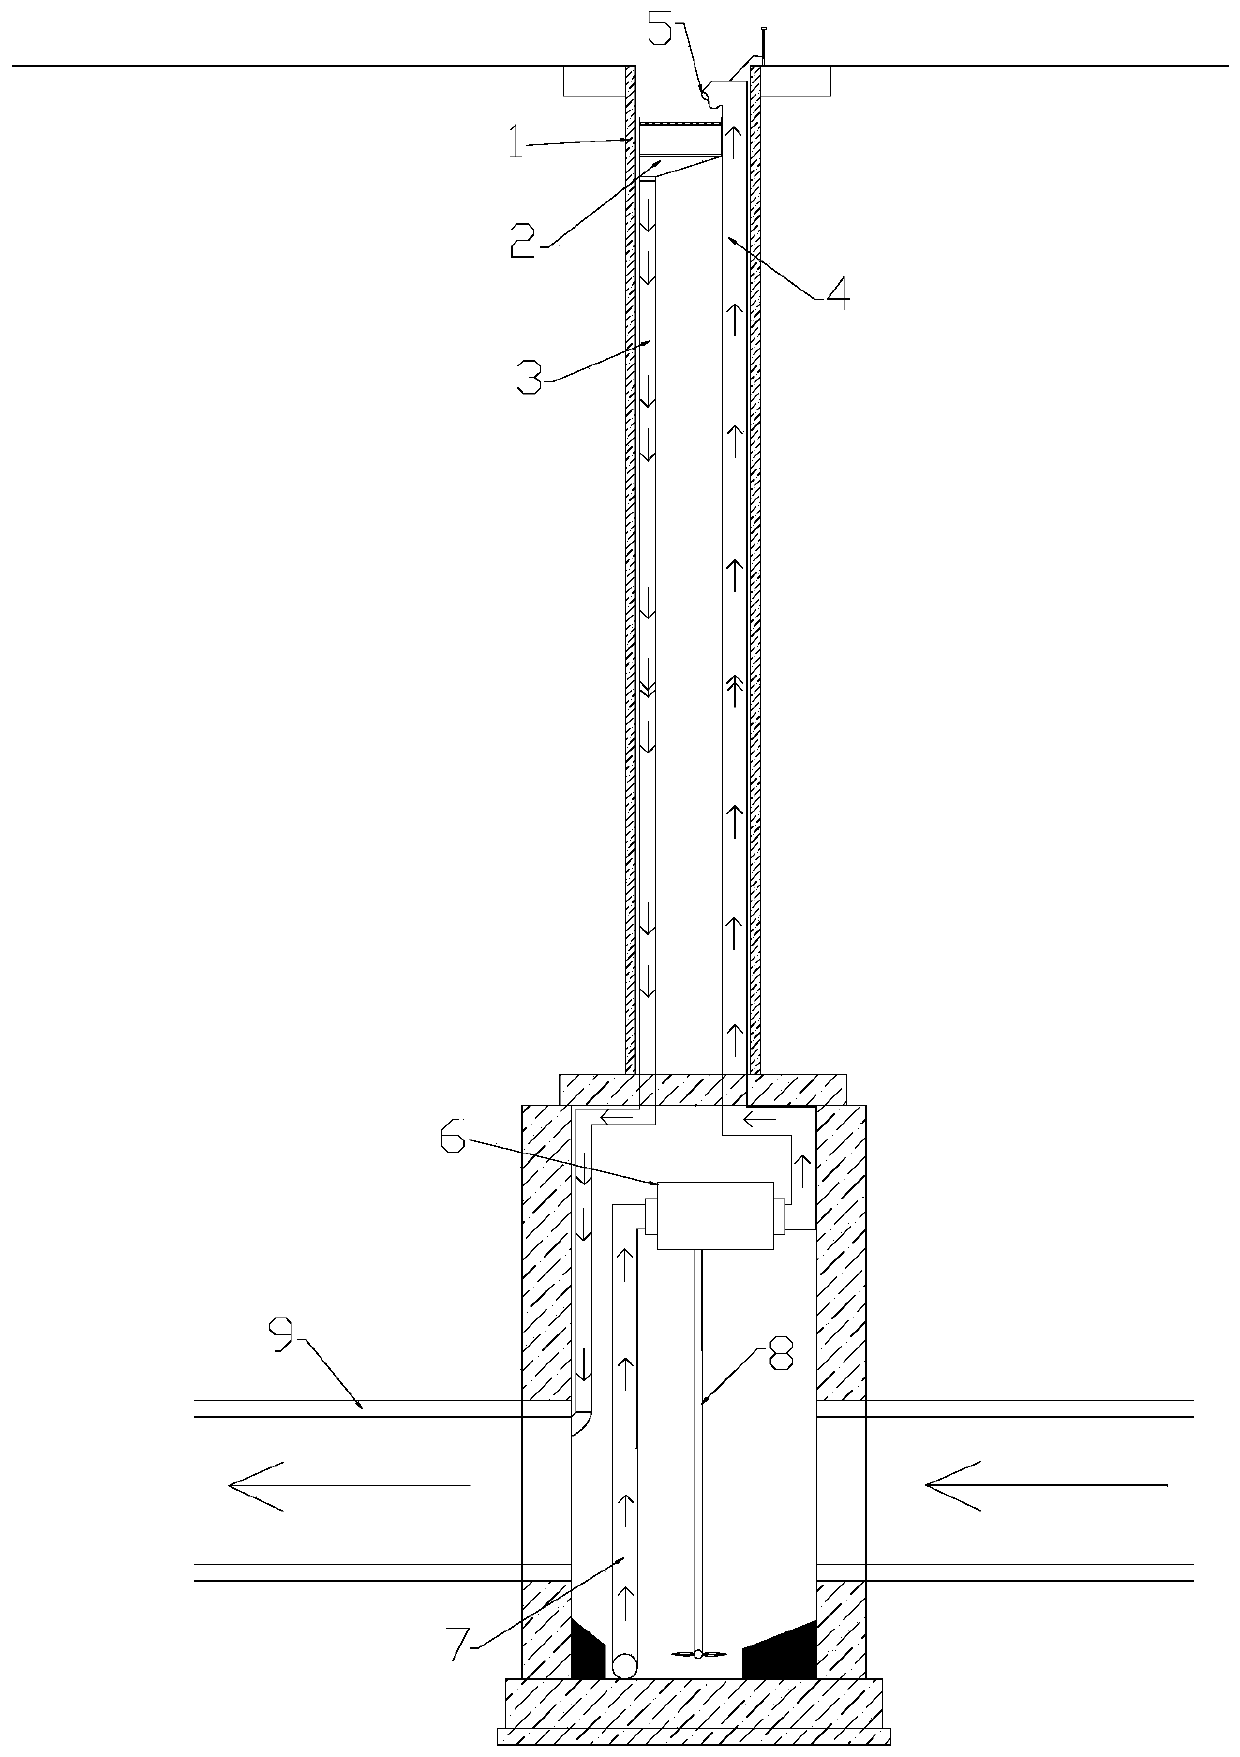 Municipal drainage engineering catch-basin dredging device and method